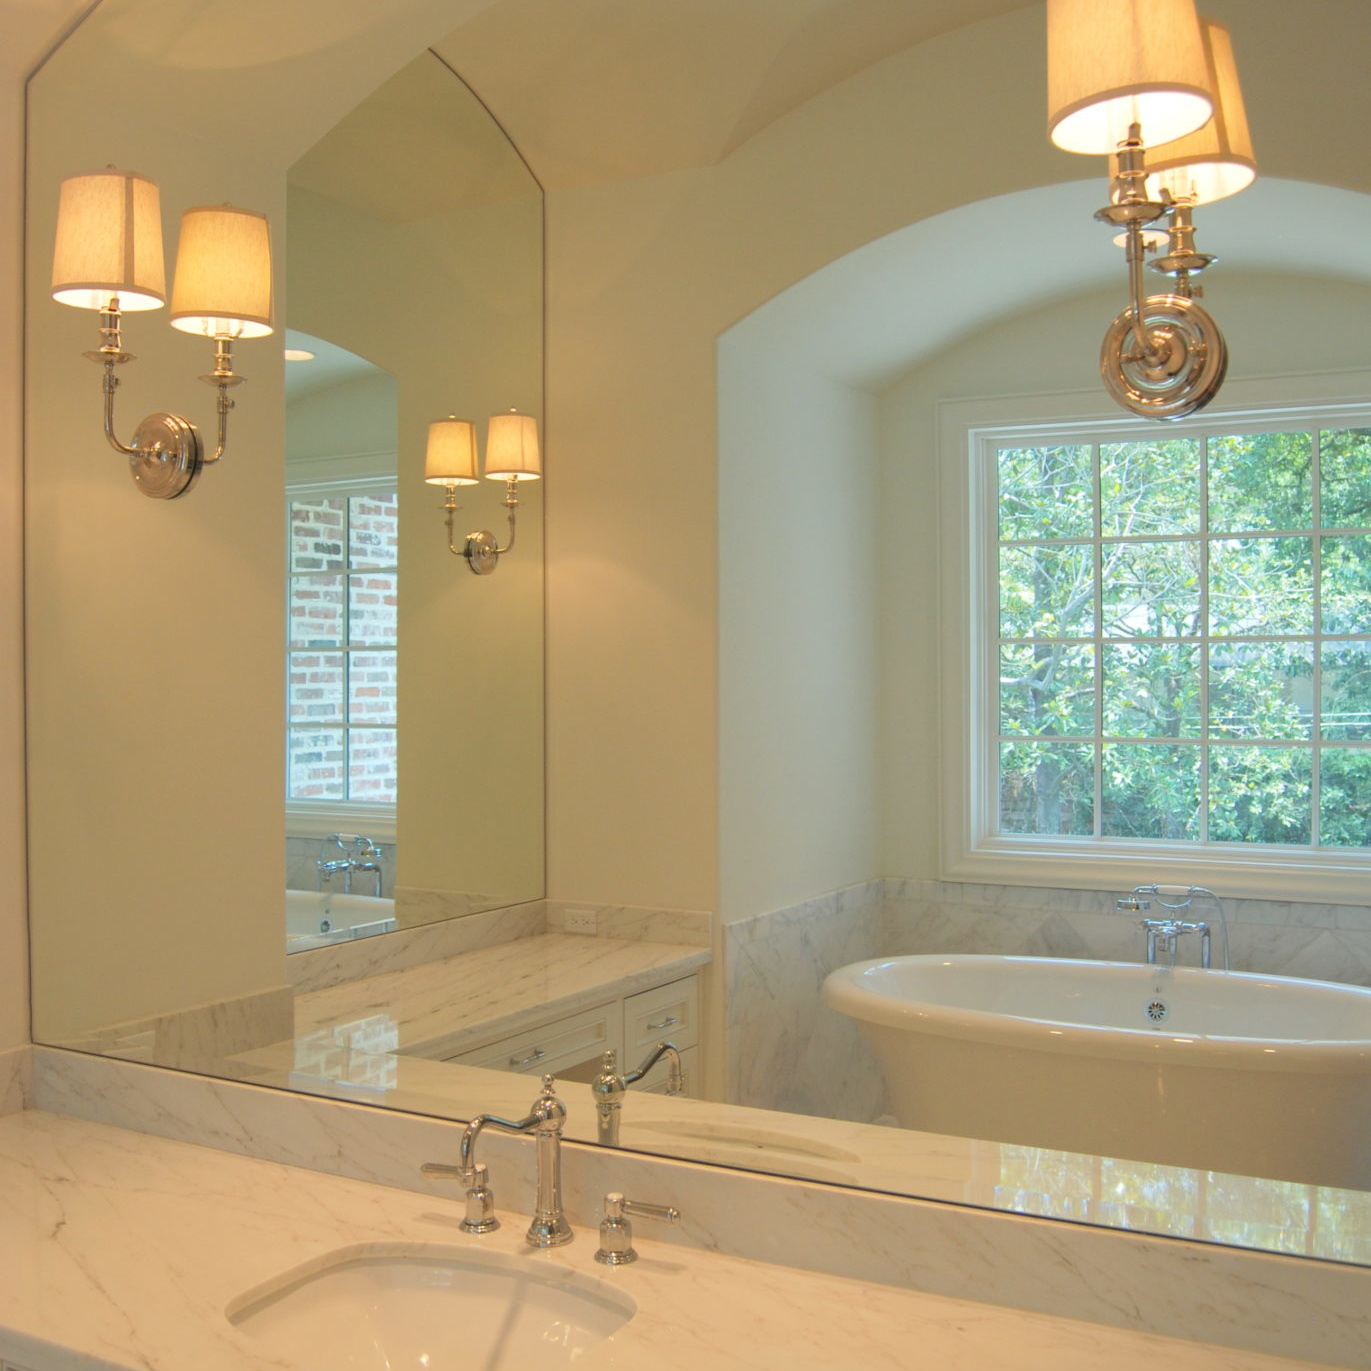 Newly remodeled bathroom with white marble countertops and large mirror